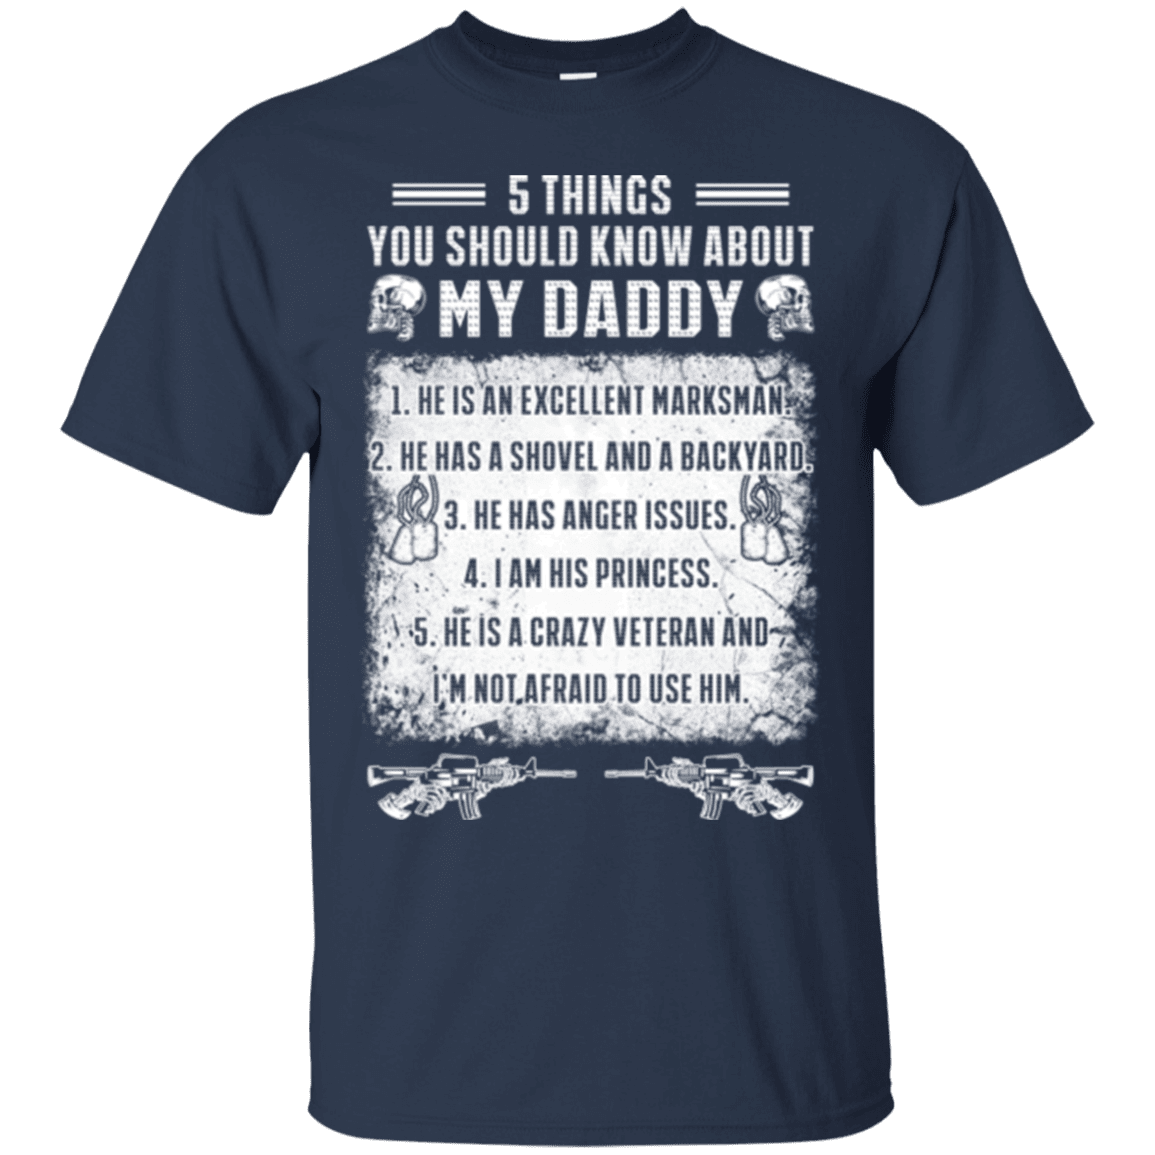 Military T-Shirt "5 Things You Should Know About My Daddy"-TShirt-General-Veterans Nation